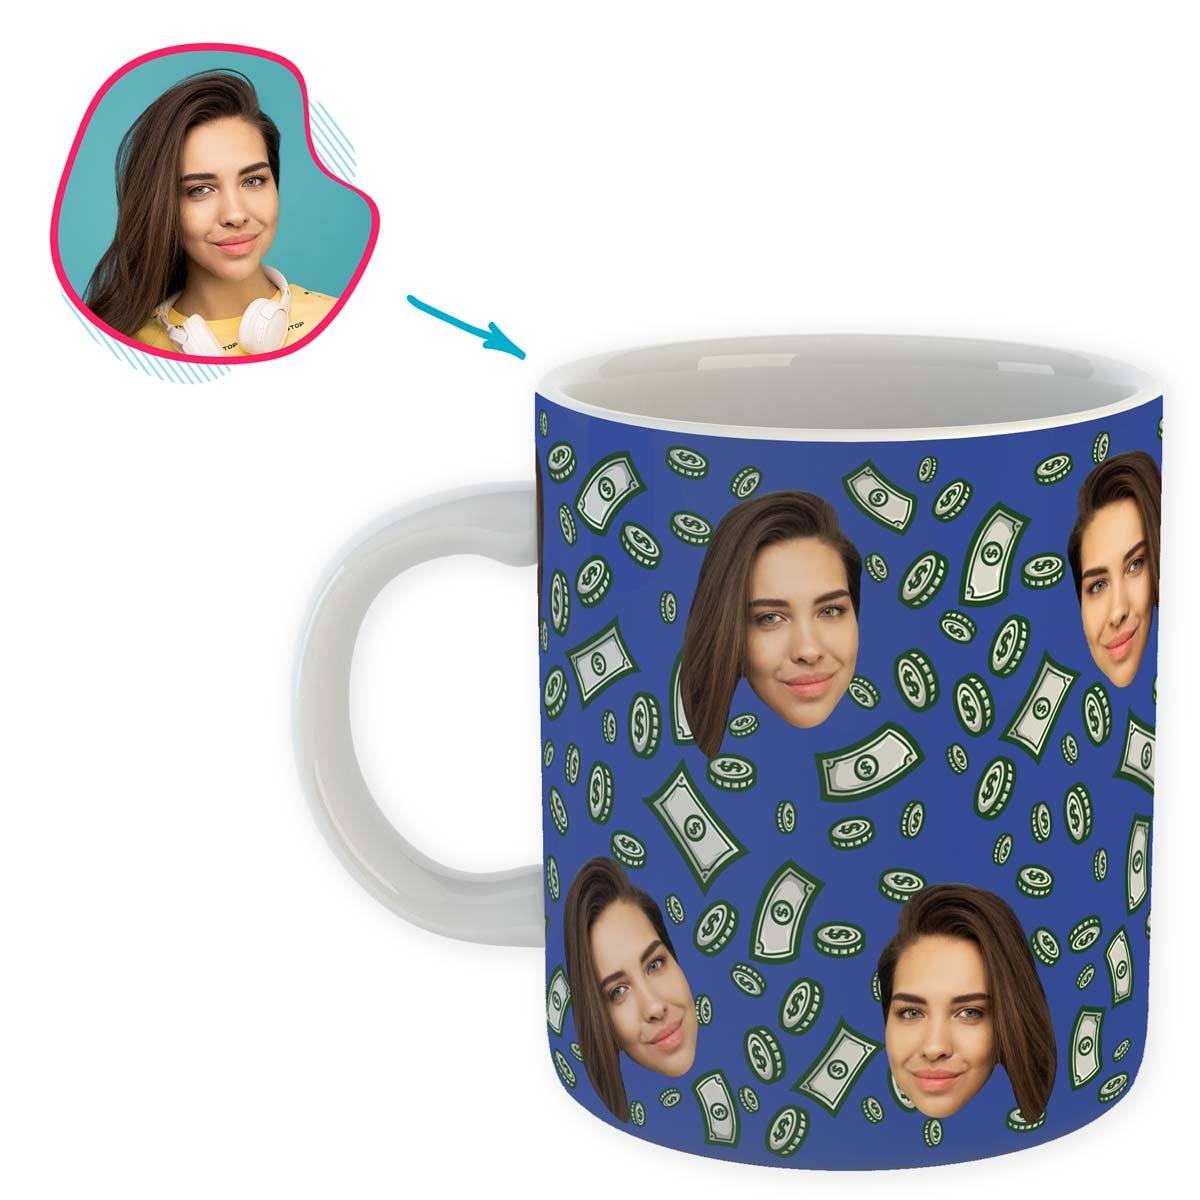 darkblue Money mug personalized with photo of face printed on it